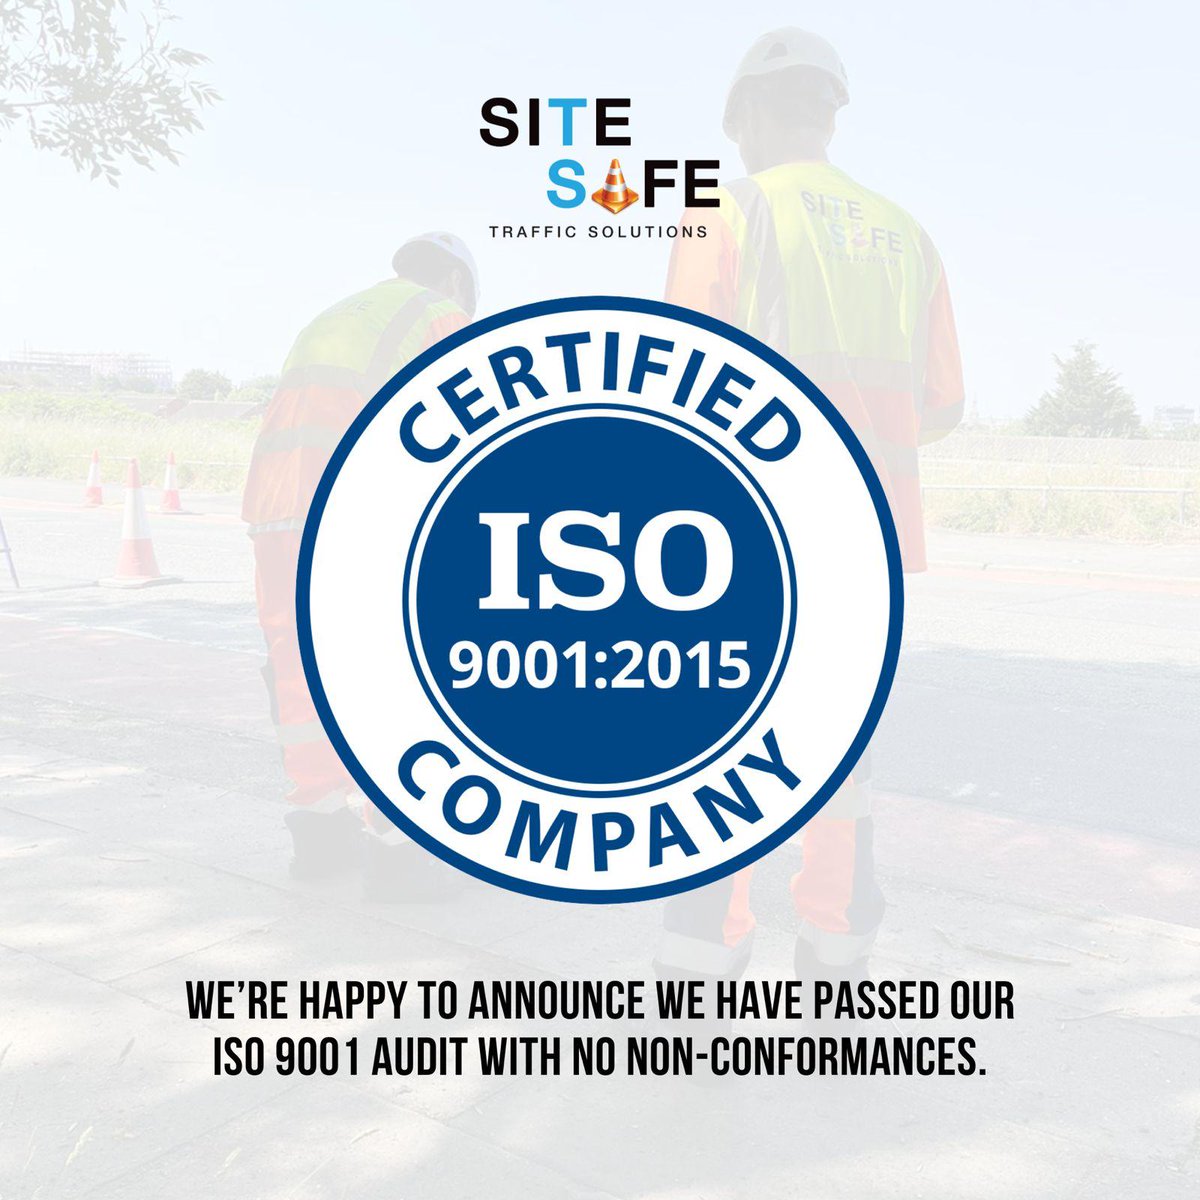 We are thrilled to announce that we have recently passed our ISO 9001 audit with zero NCRs (none-conformance reports). 

A huge thank you to our brilliant staff, especially Phil, Ryan and Abi, who made this achievement possible!

#ISO9001 #trafficsolutions #trafficmanagement